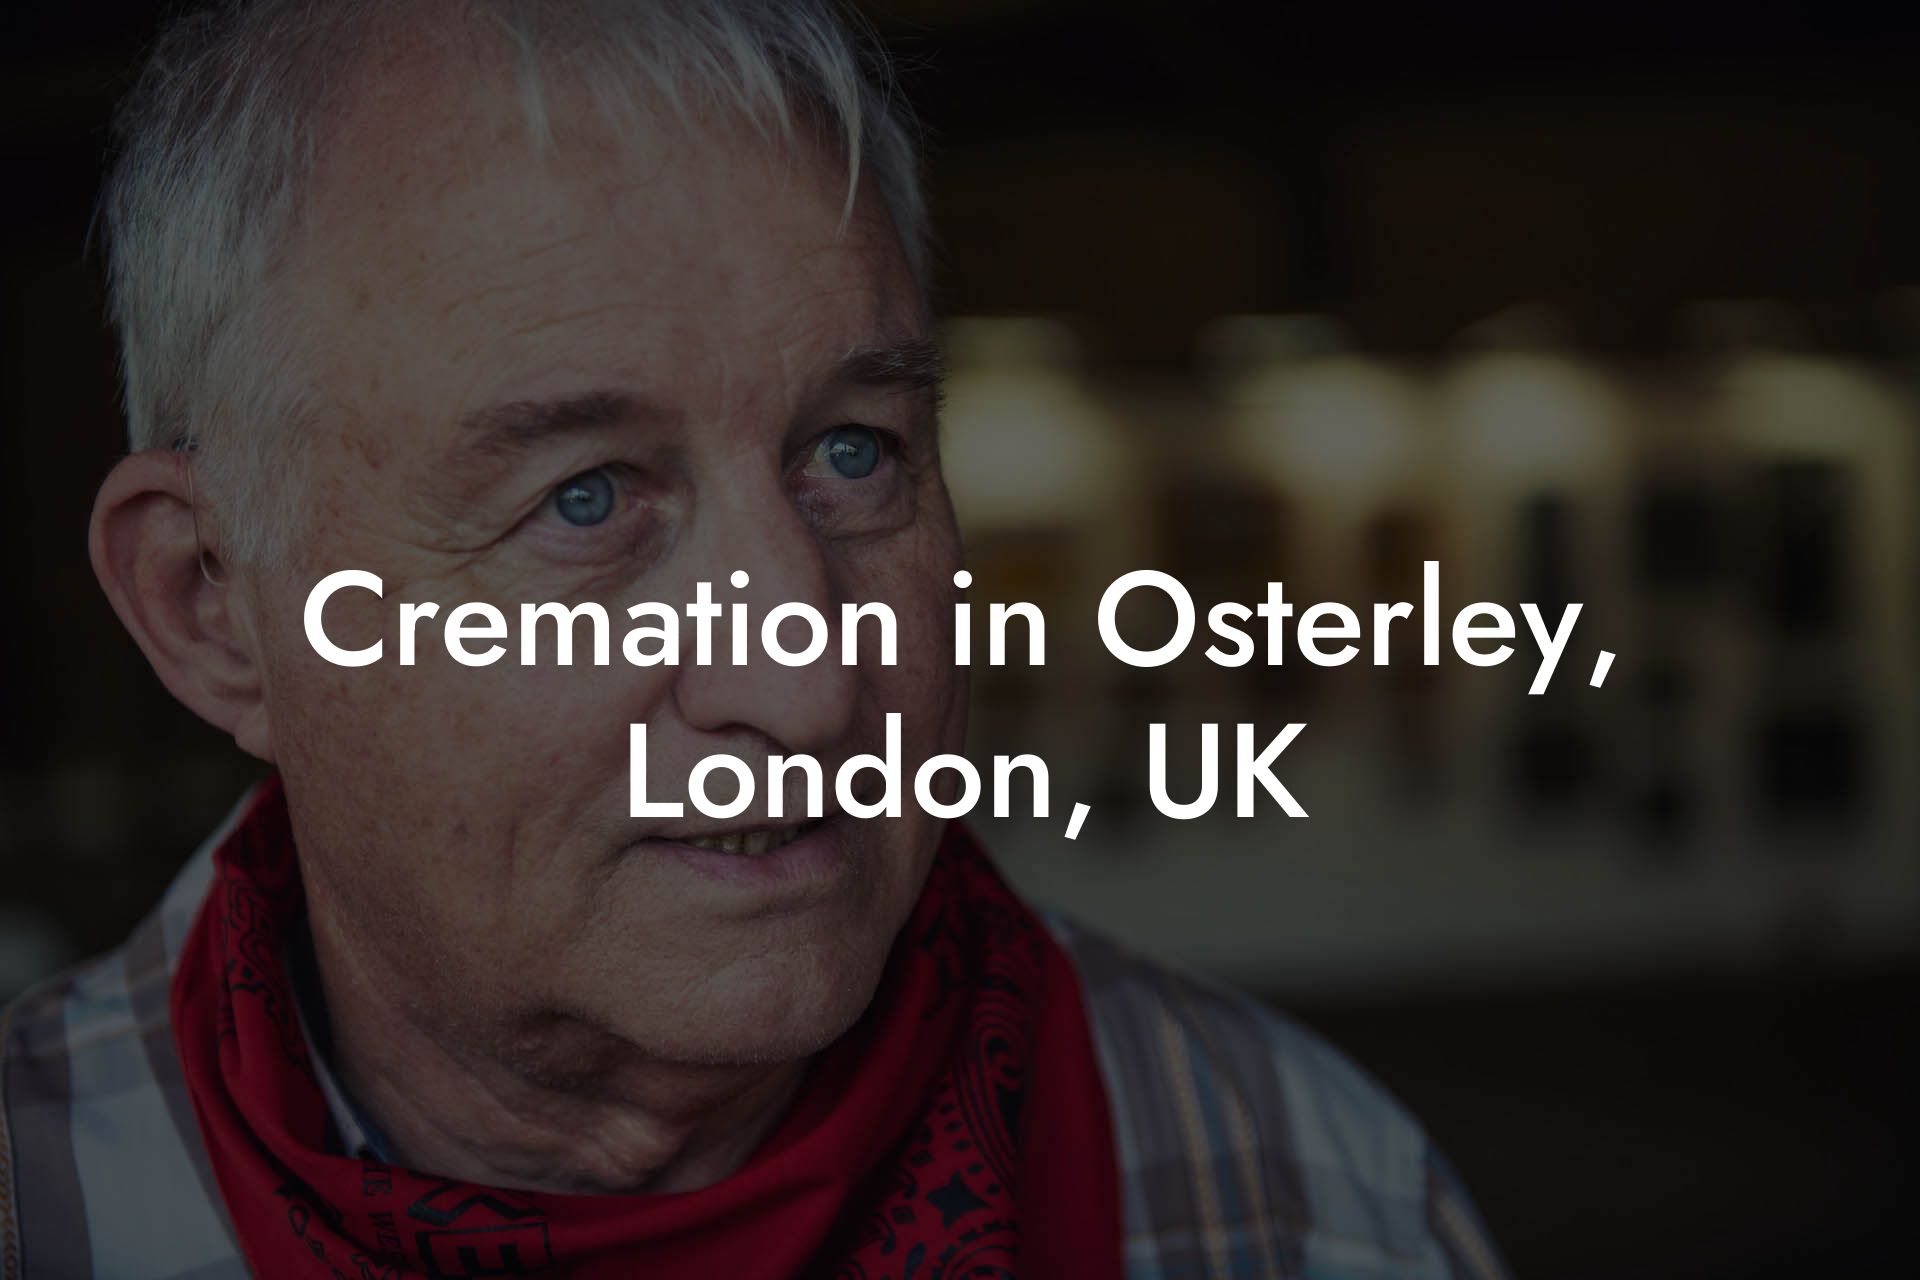 Cremation in Osterley, London, UK